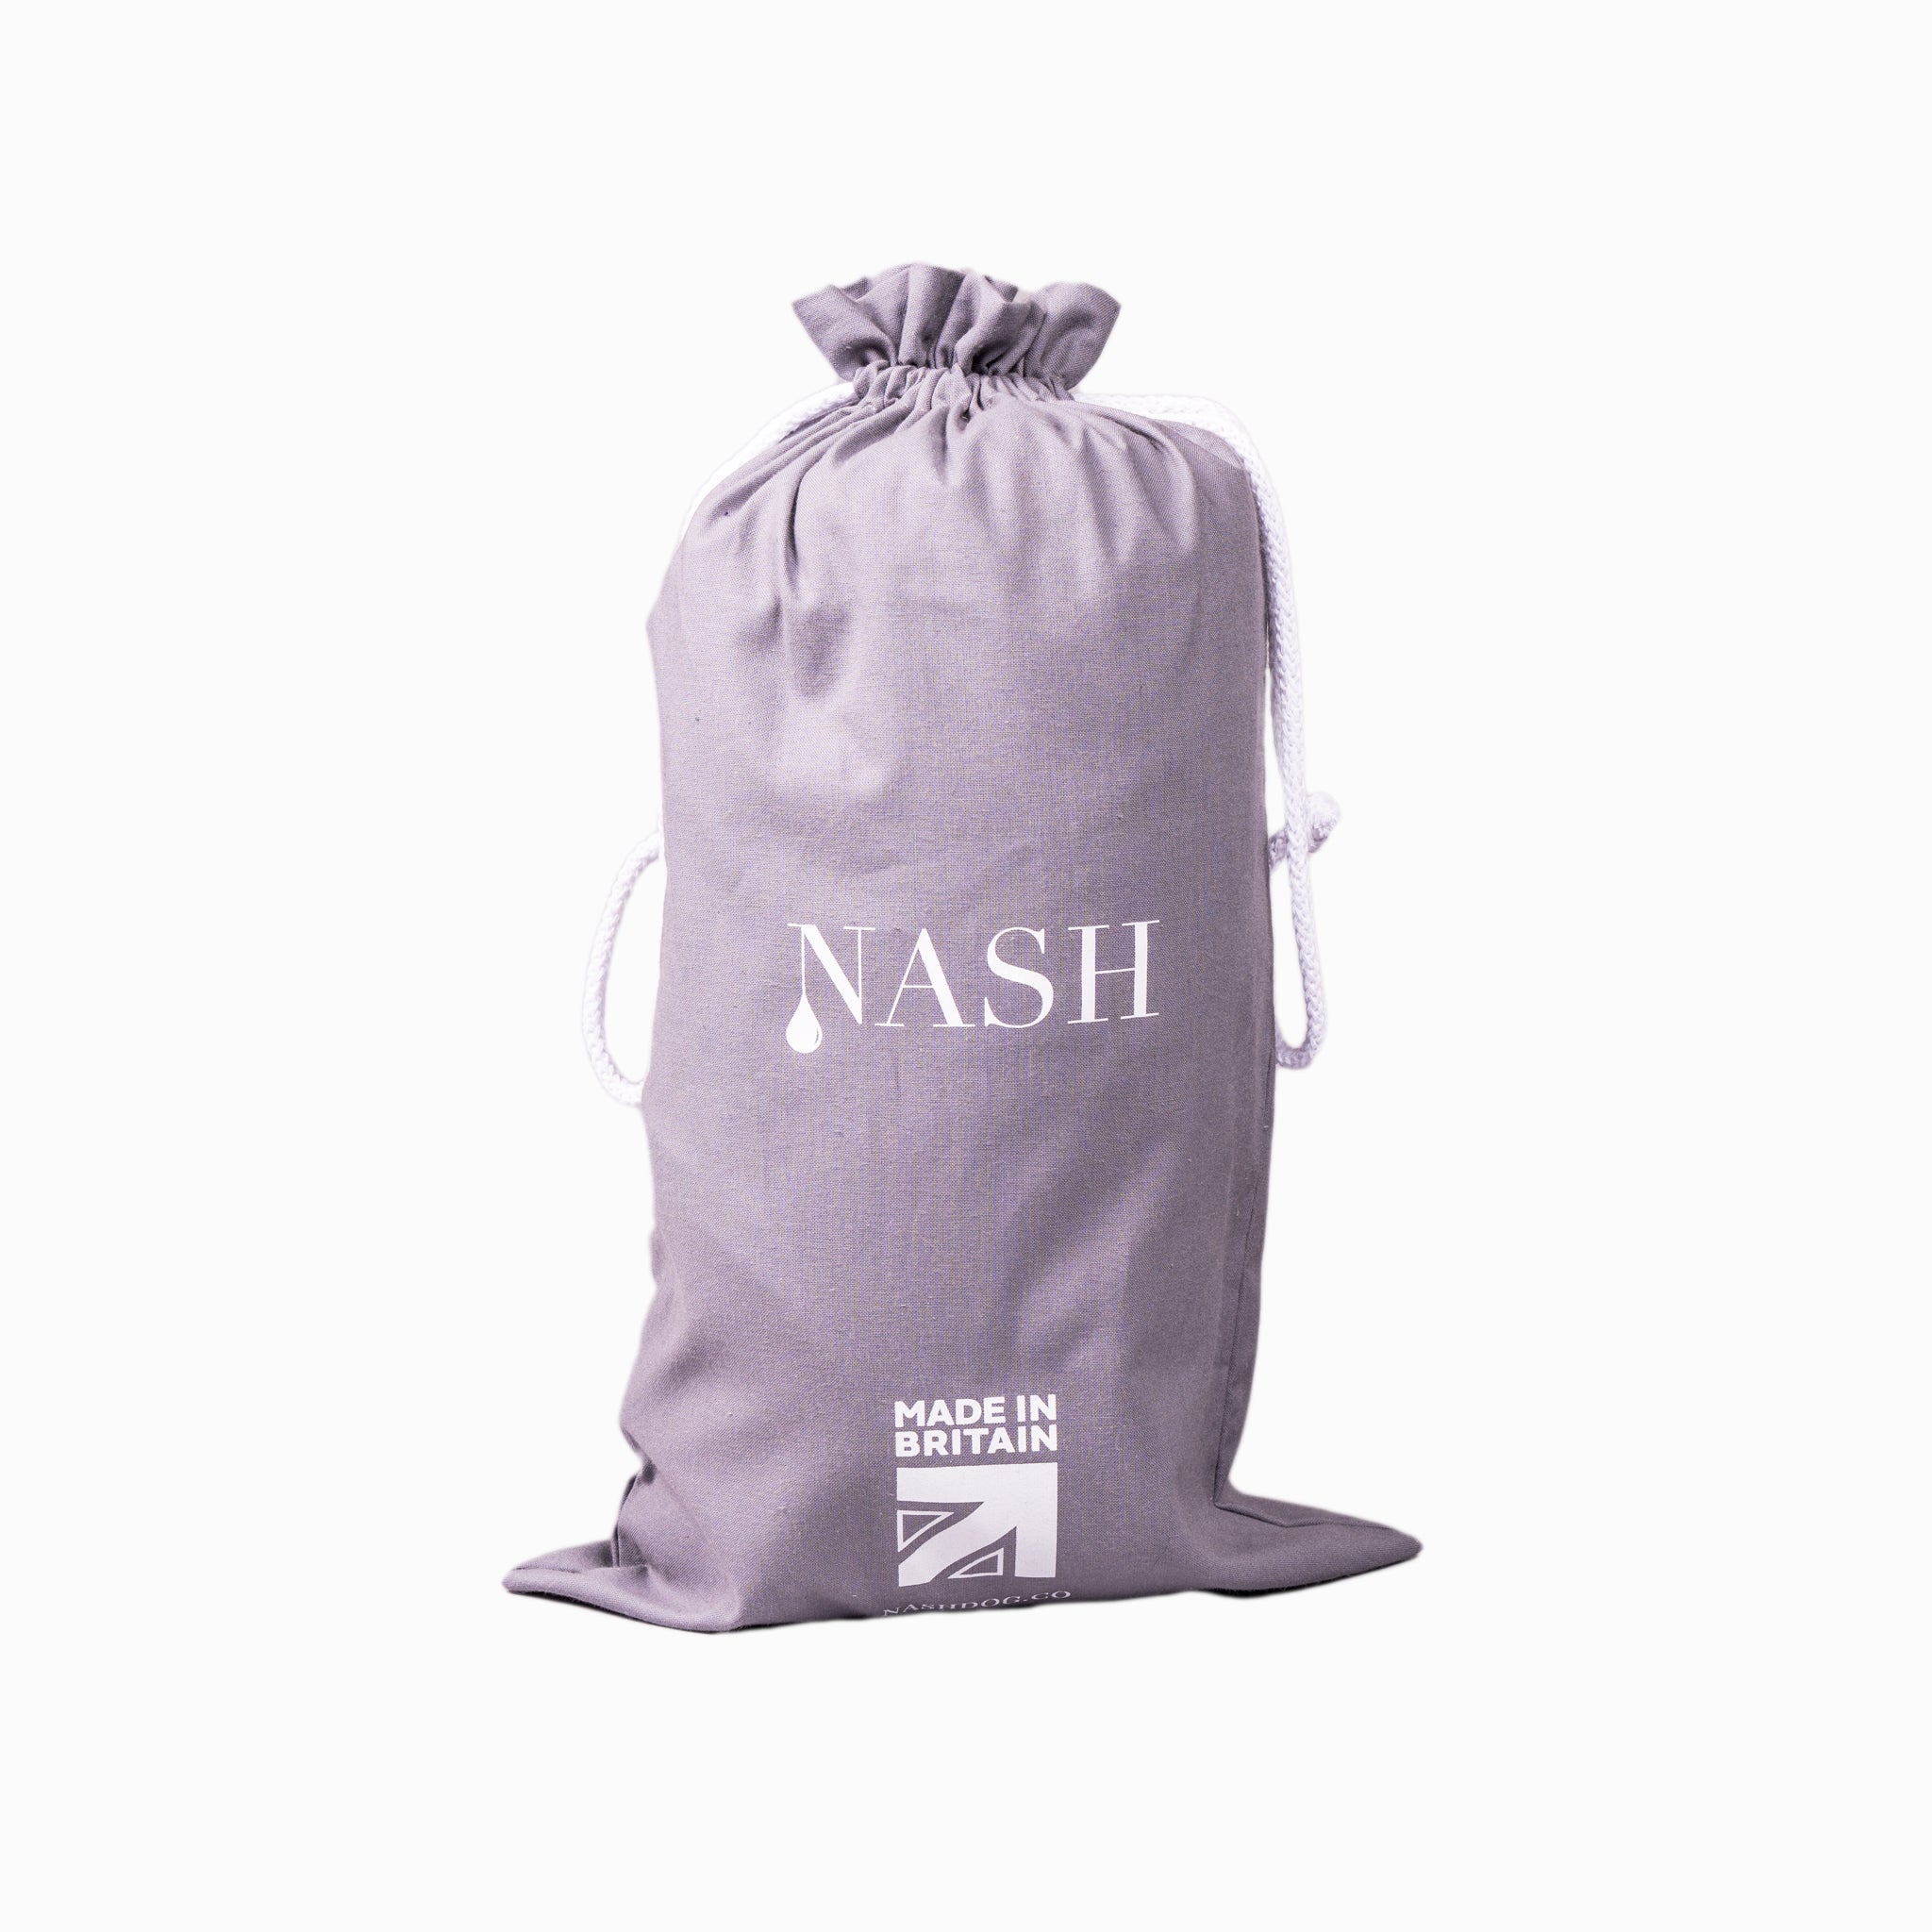 The reusable bag that comes with a pair of NASH bamboo dog drying mitts.